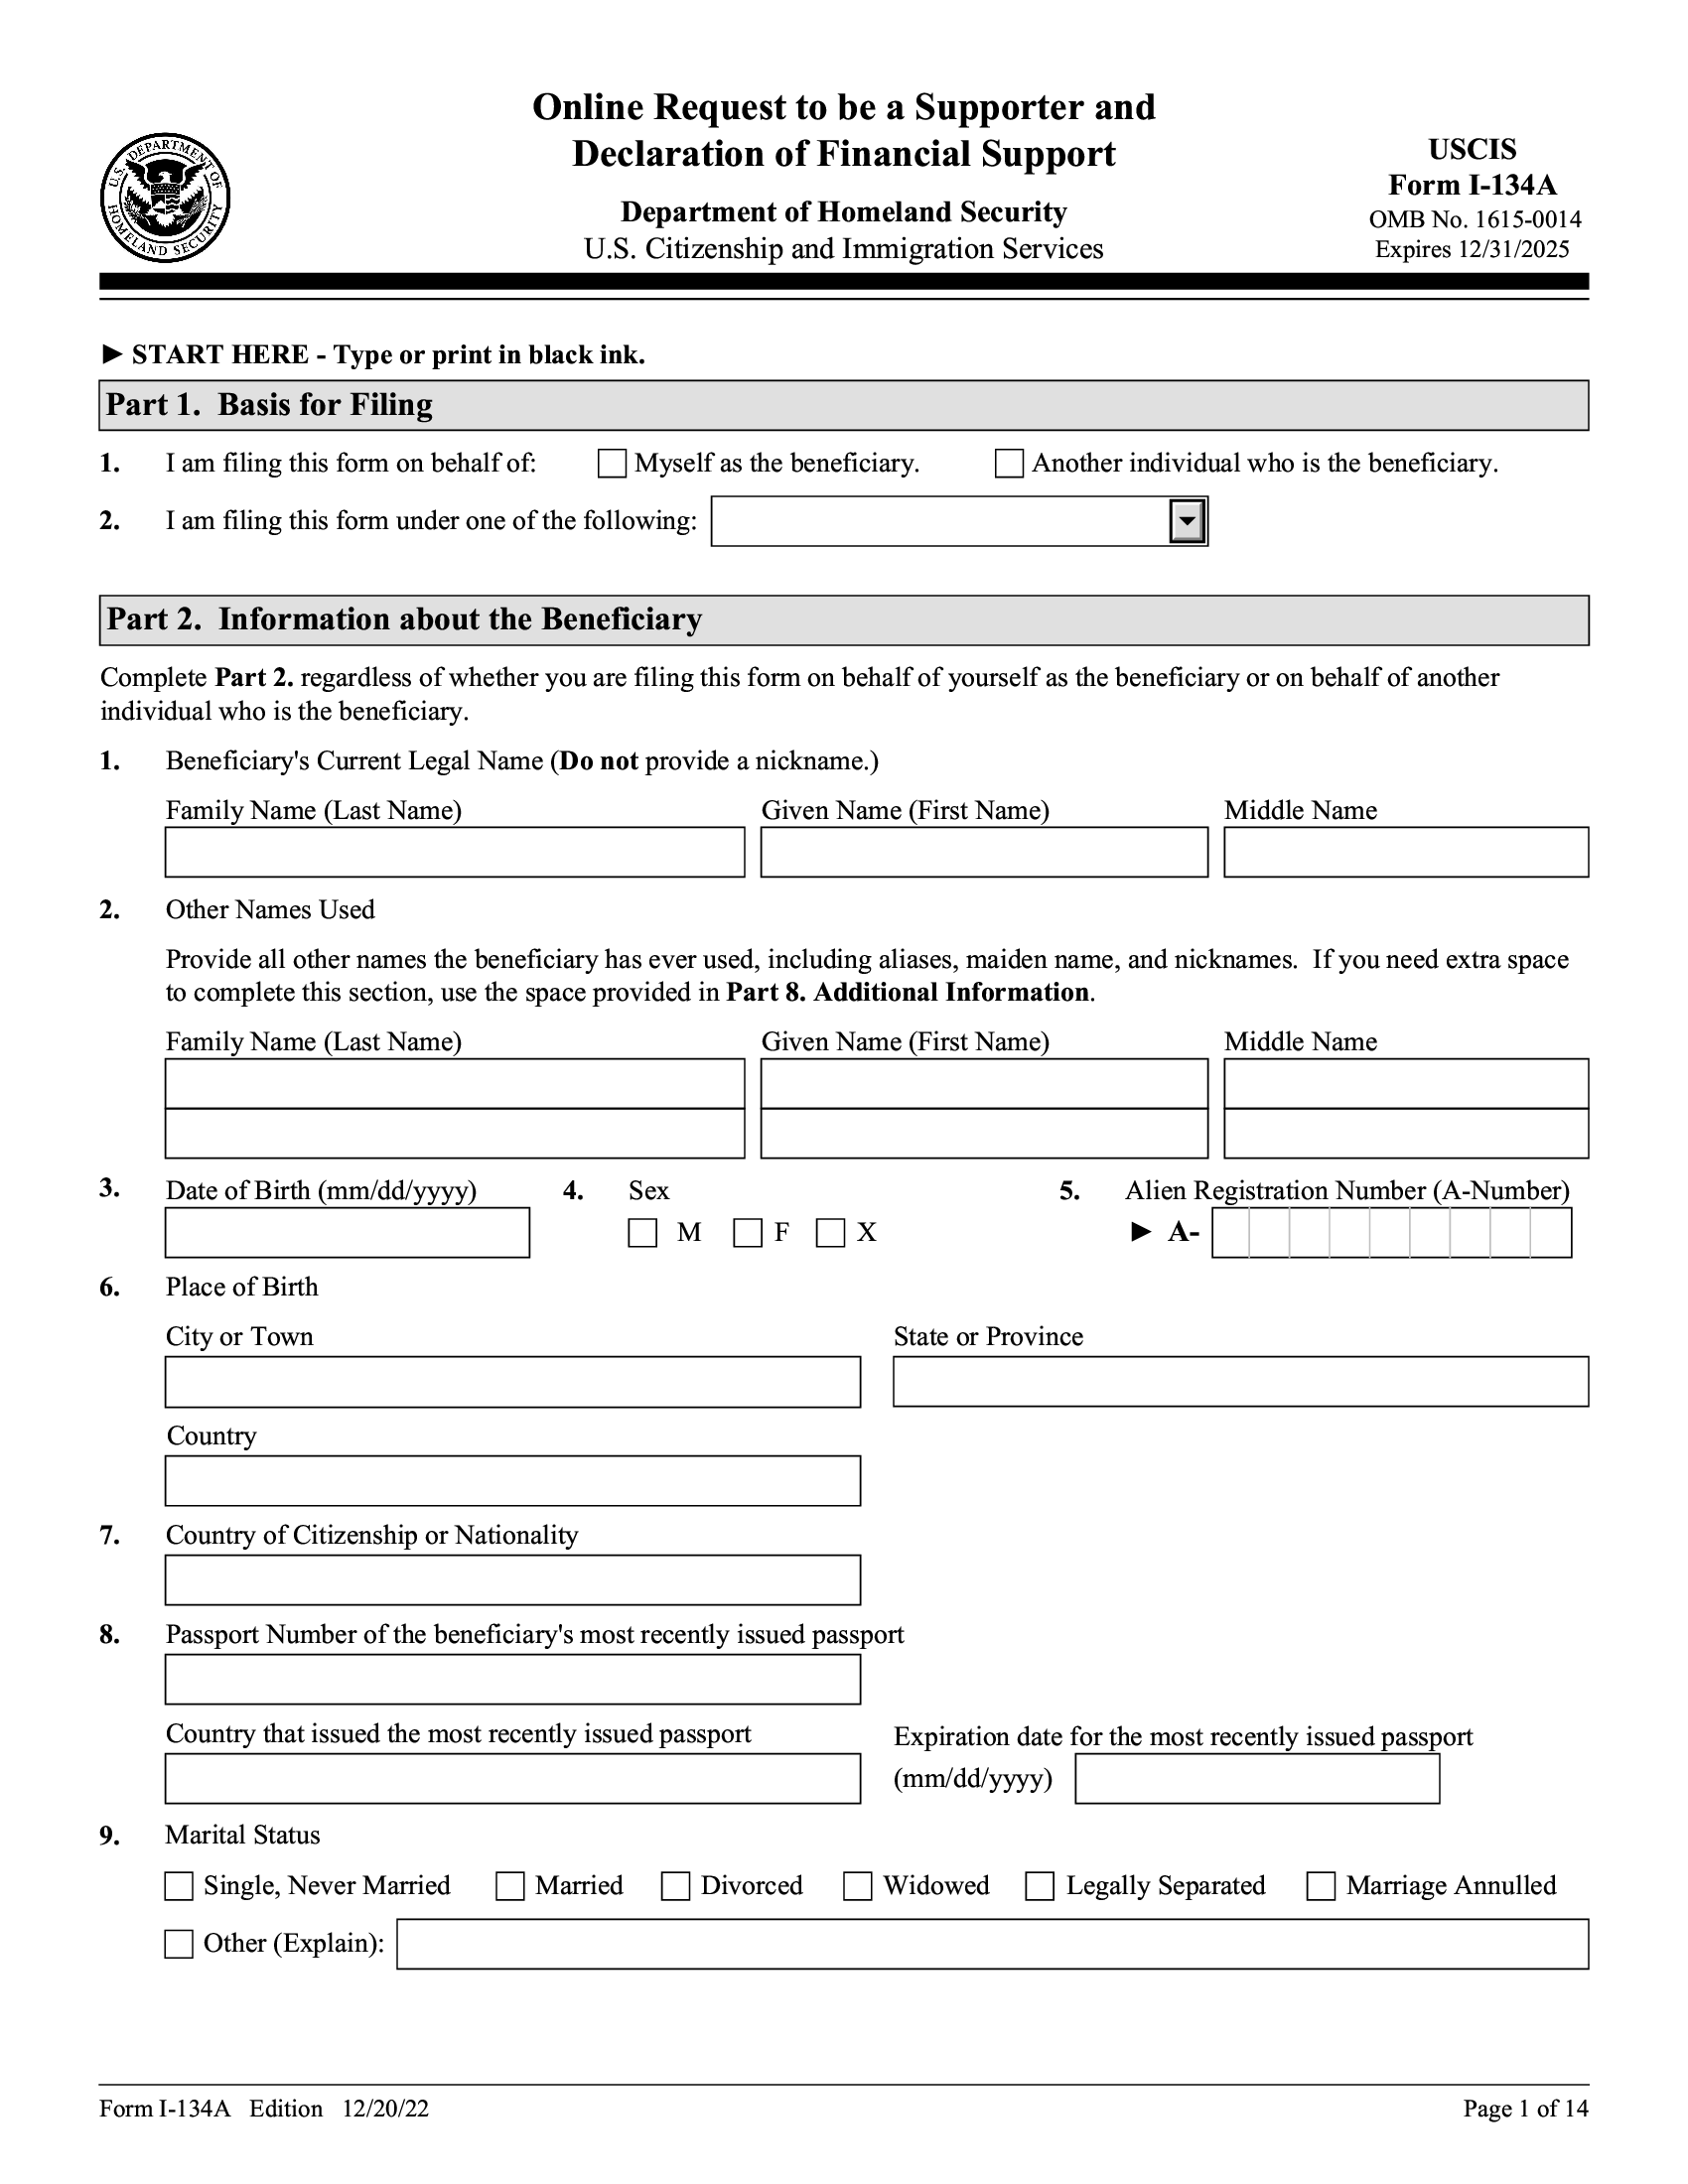 Form I134A. Online Request to be a Supporter and Declaration of